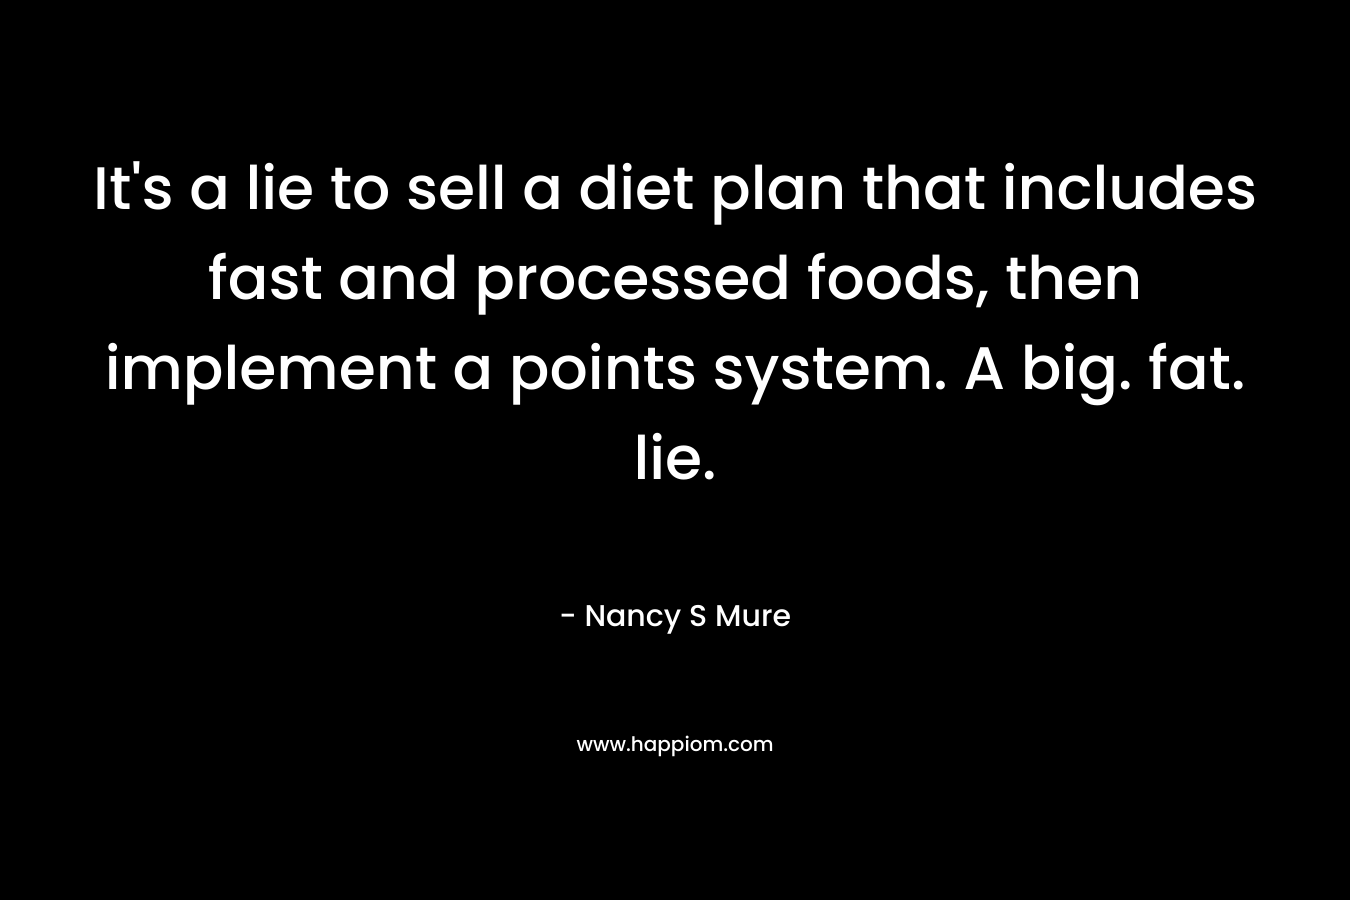 It's a lie to sell a diet plan that includes fast and processed foods, then implement a points system. A big. fat. lie.